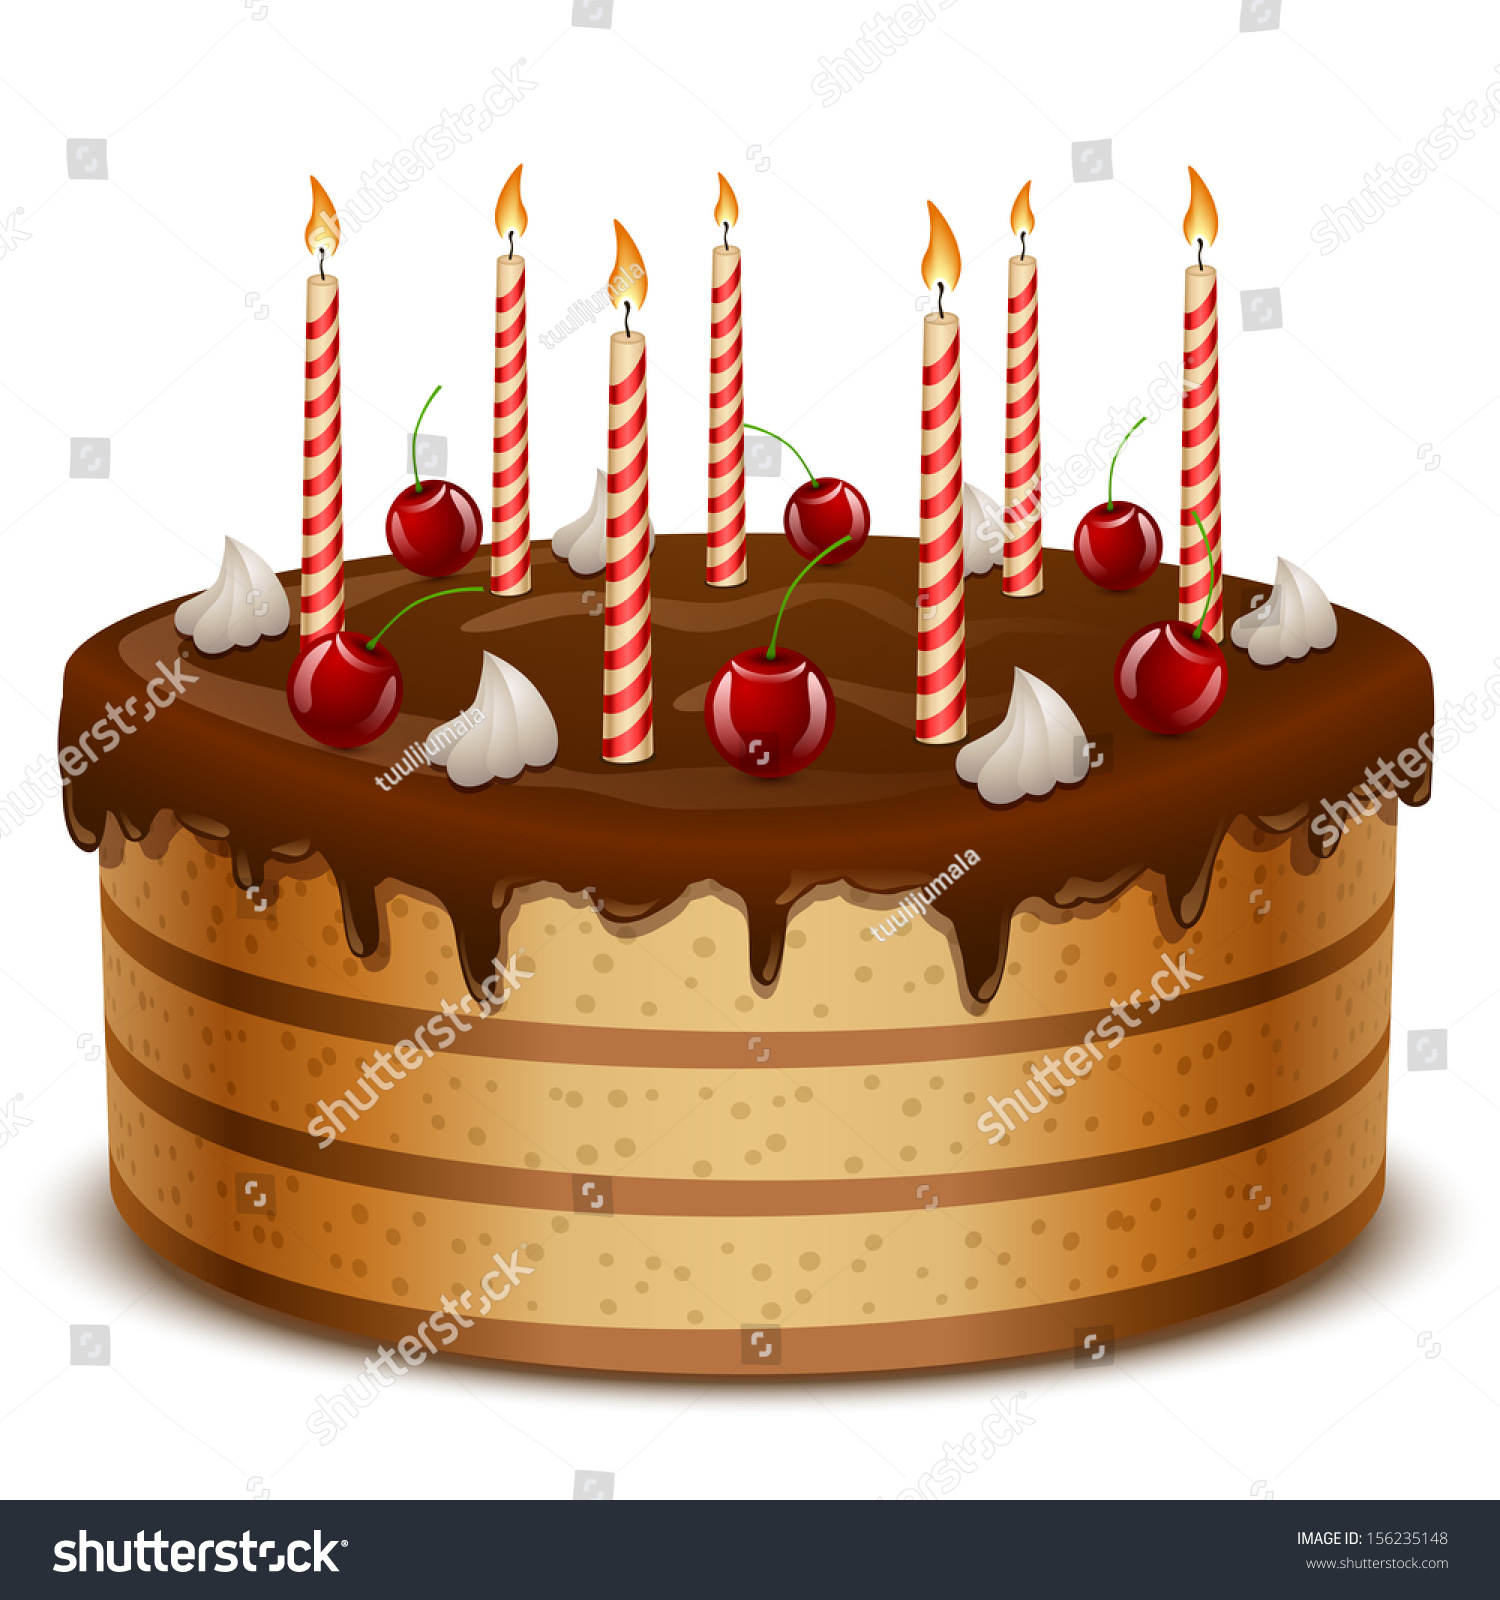 Birthday Cake Candles Isolated On White Stock Vector 156235148 ...